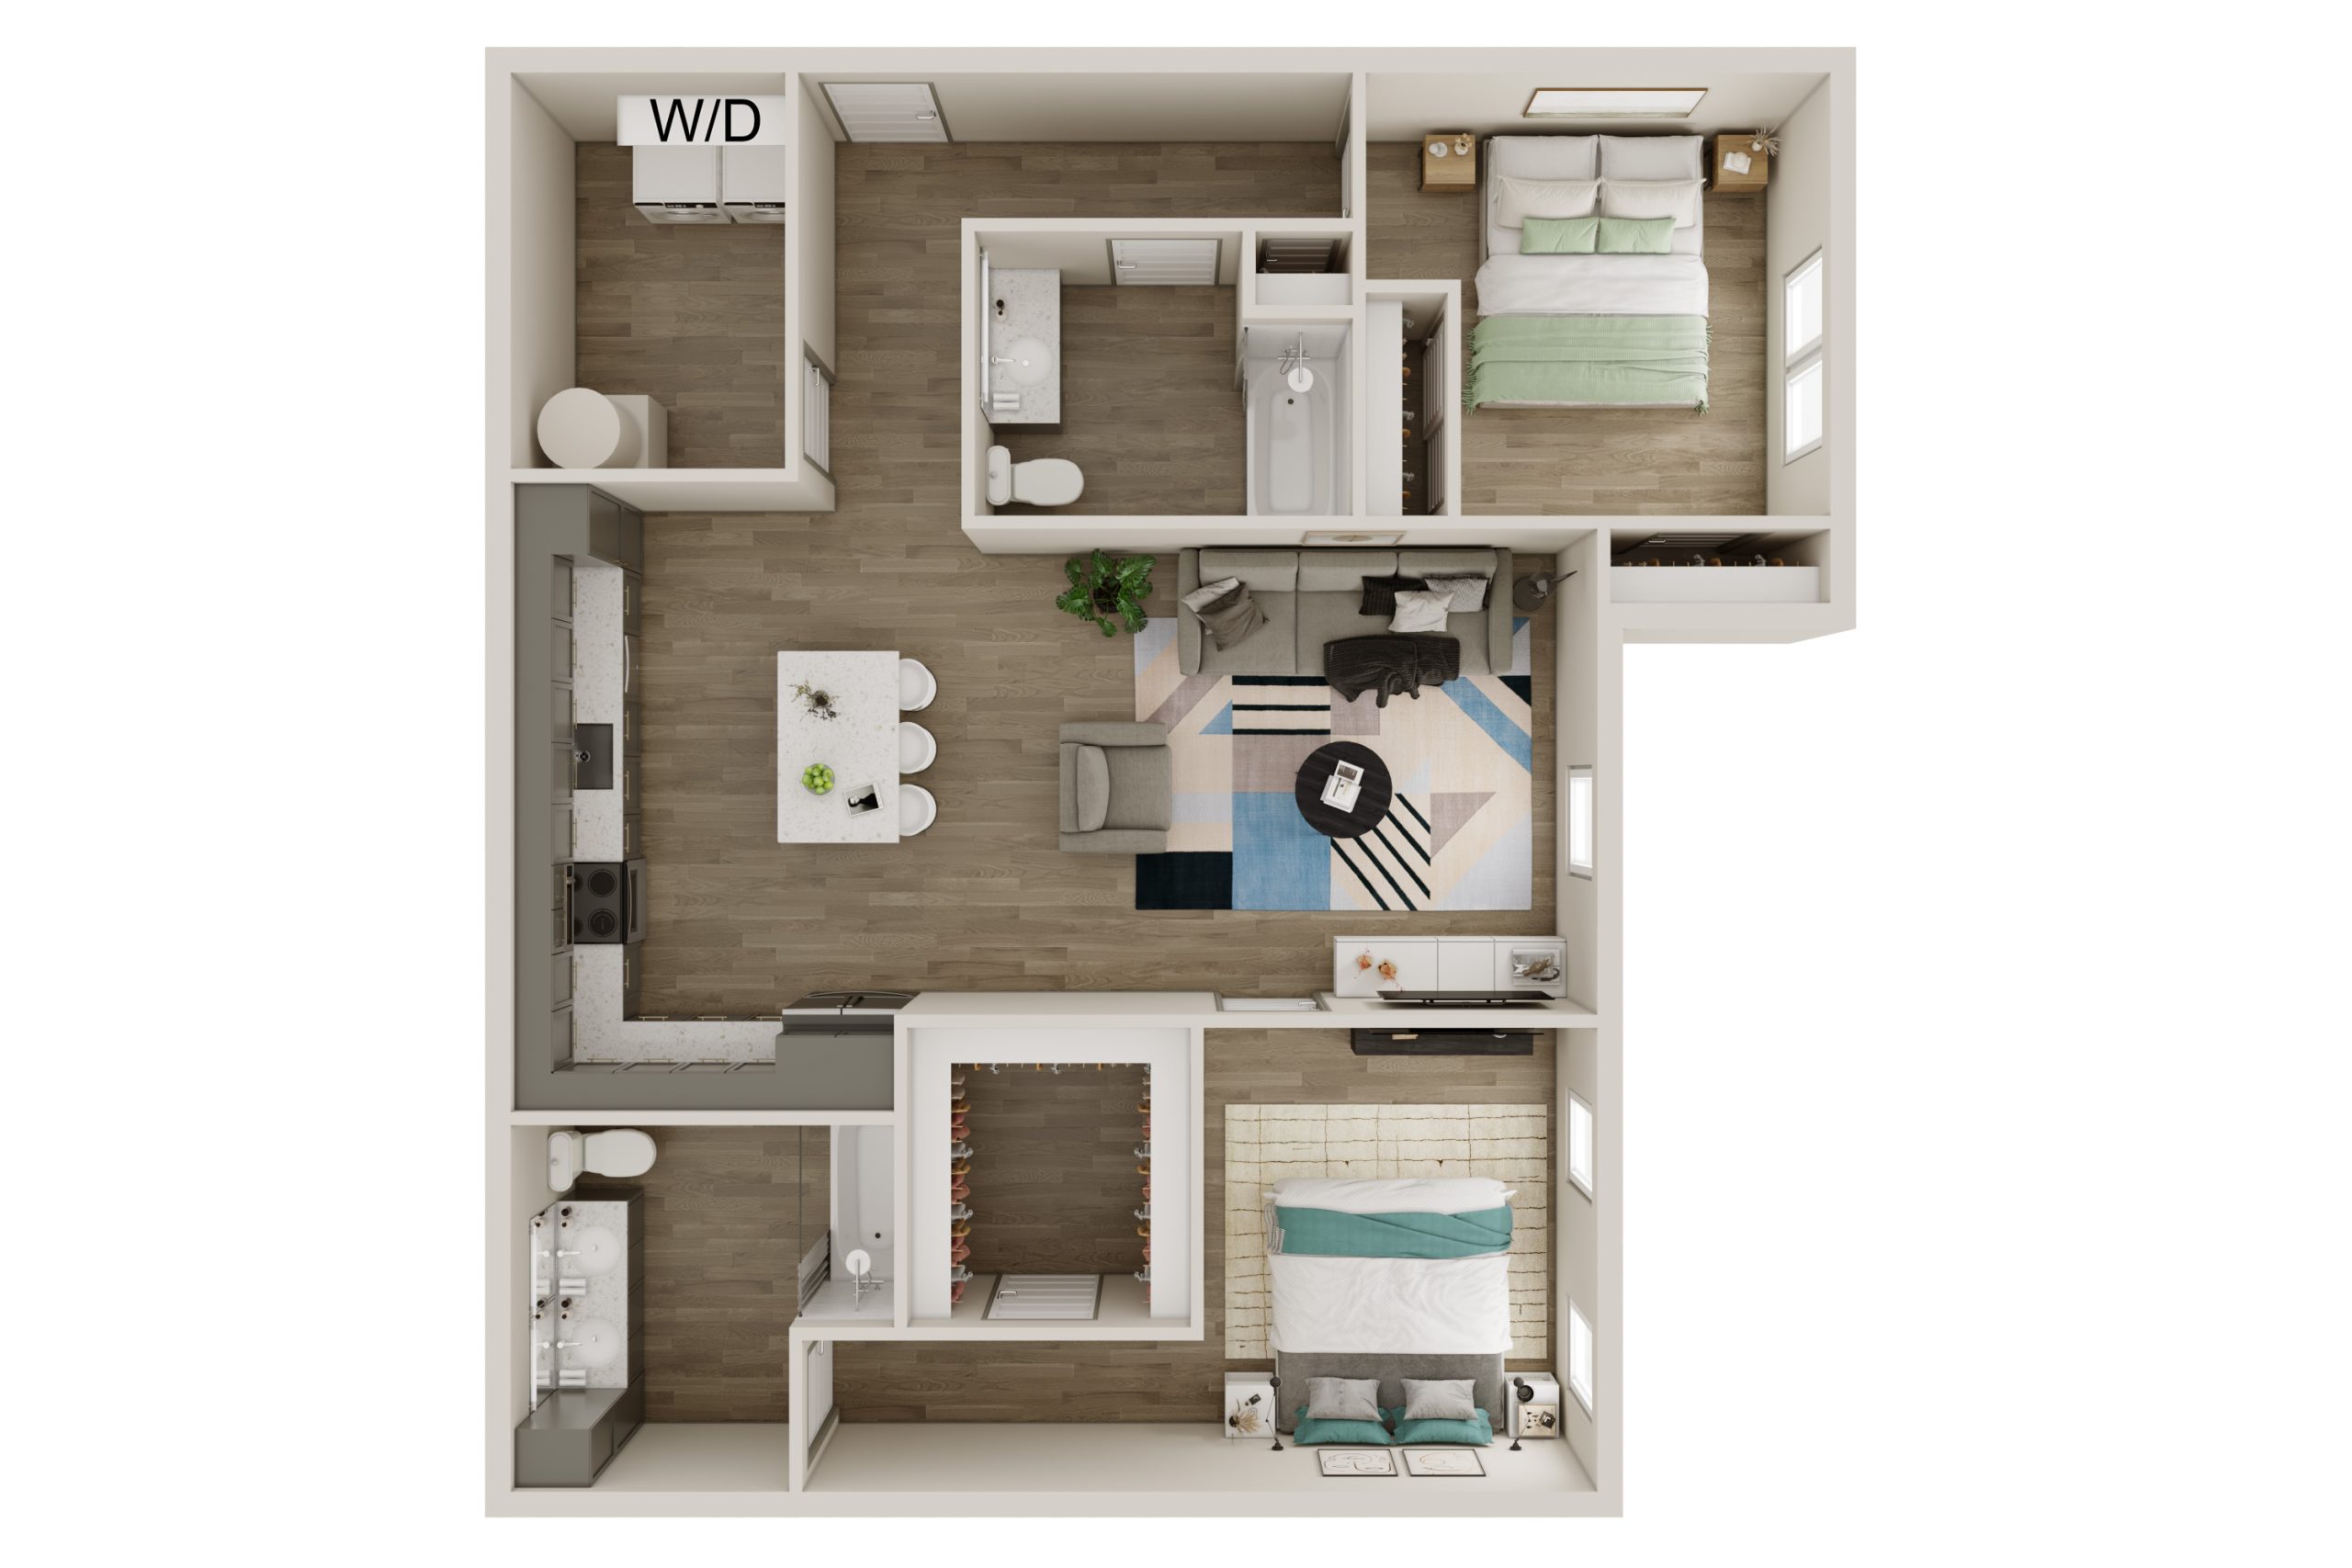 A NIANGUA unit with 2 Bedrooms and 2 Bathrooms with area of 1089 sq. ft